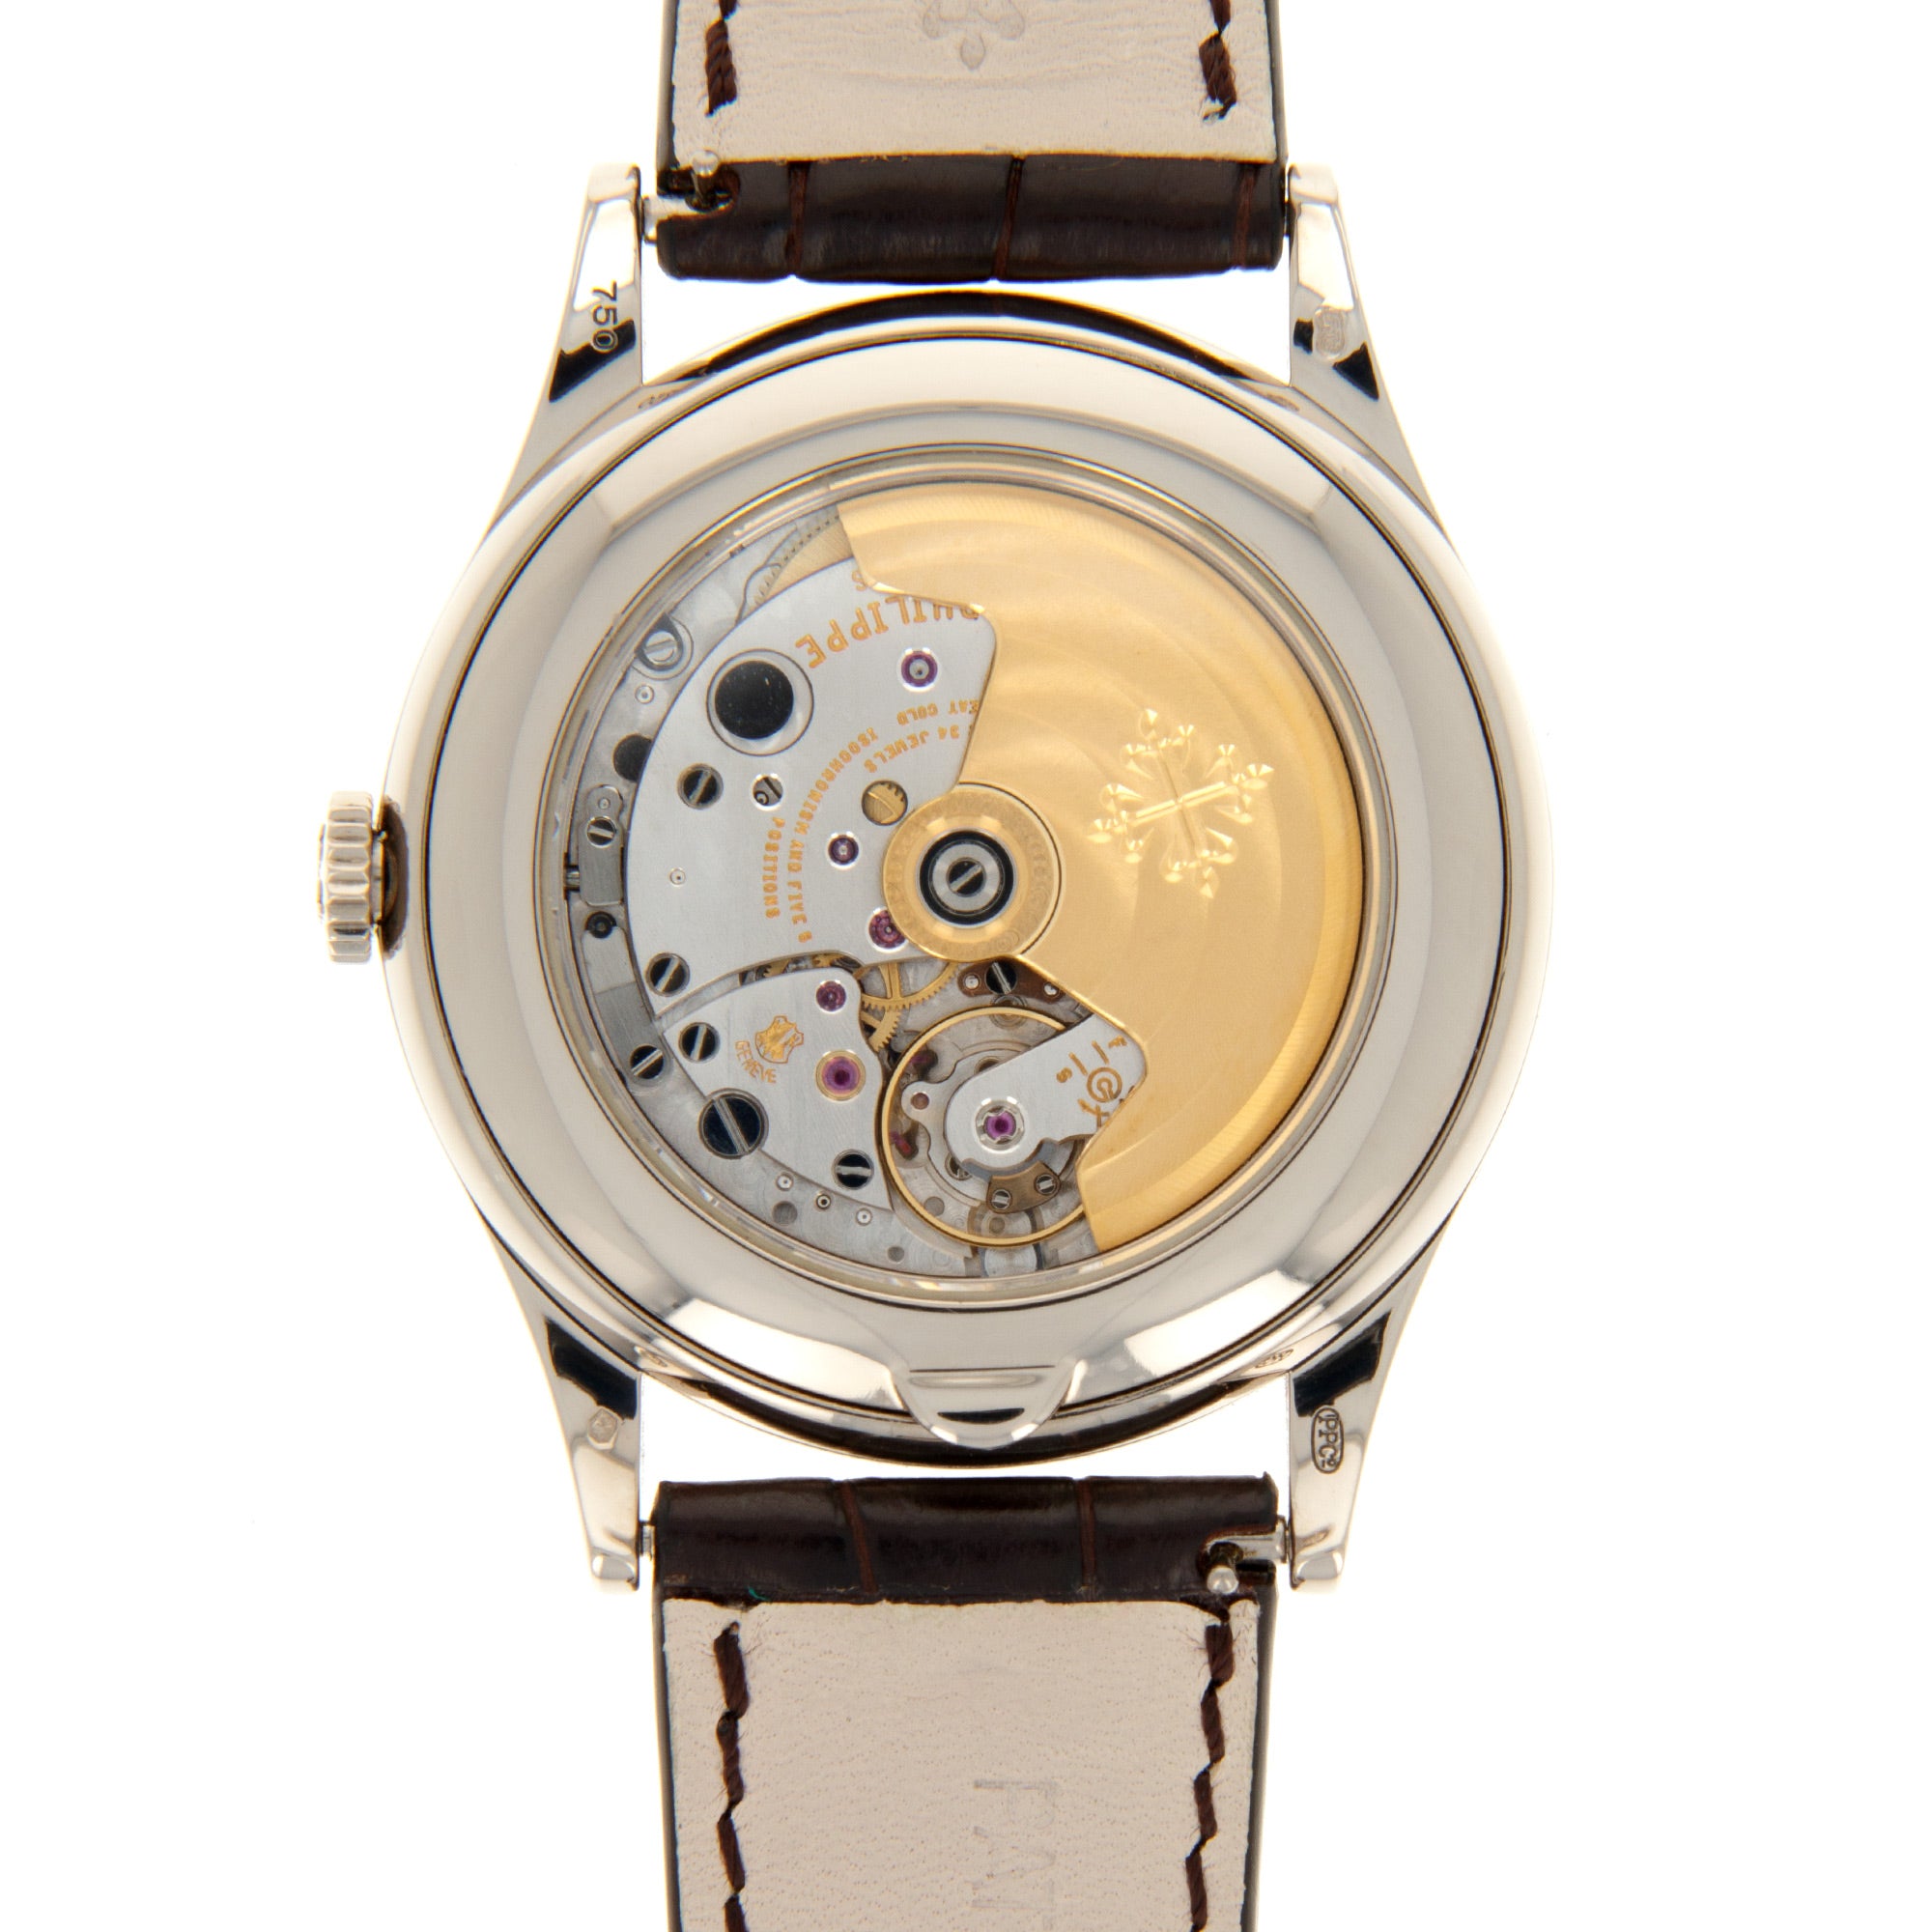 Patek Philippe - Patek Philippe White Gold Sector Dial Annual Calendar Watch Ref. 5396 - The Keystone Watches